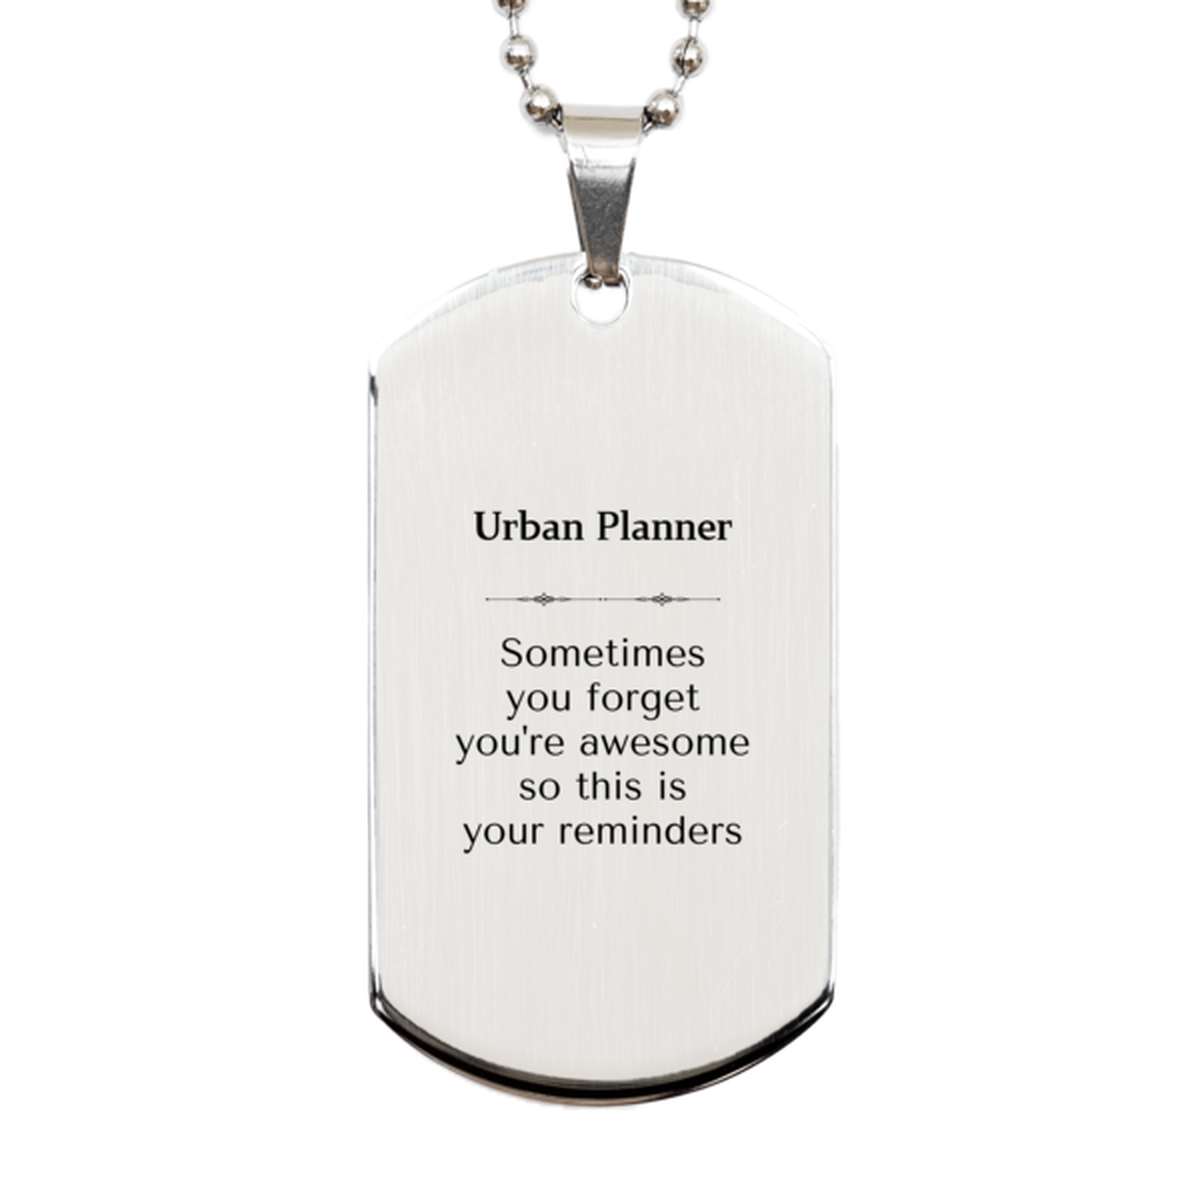 Sentimental Urban Planner Silver Dog Tag, Urban Planner Sometimes you forget you're awesome so this is your reminders, Graduation Christmas Birthday Gifts for Urban Planner, Men, Women, Coworkers